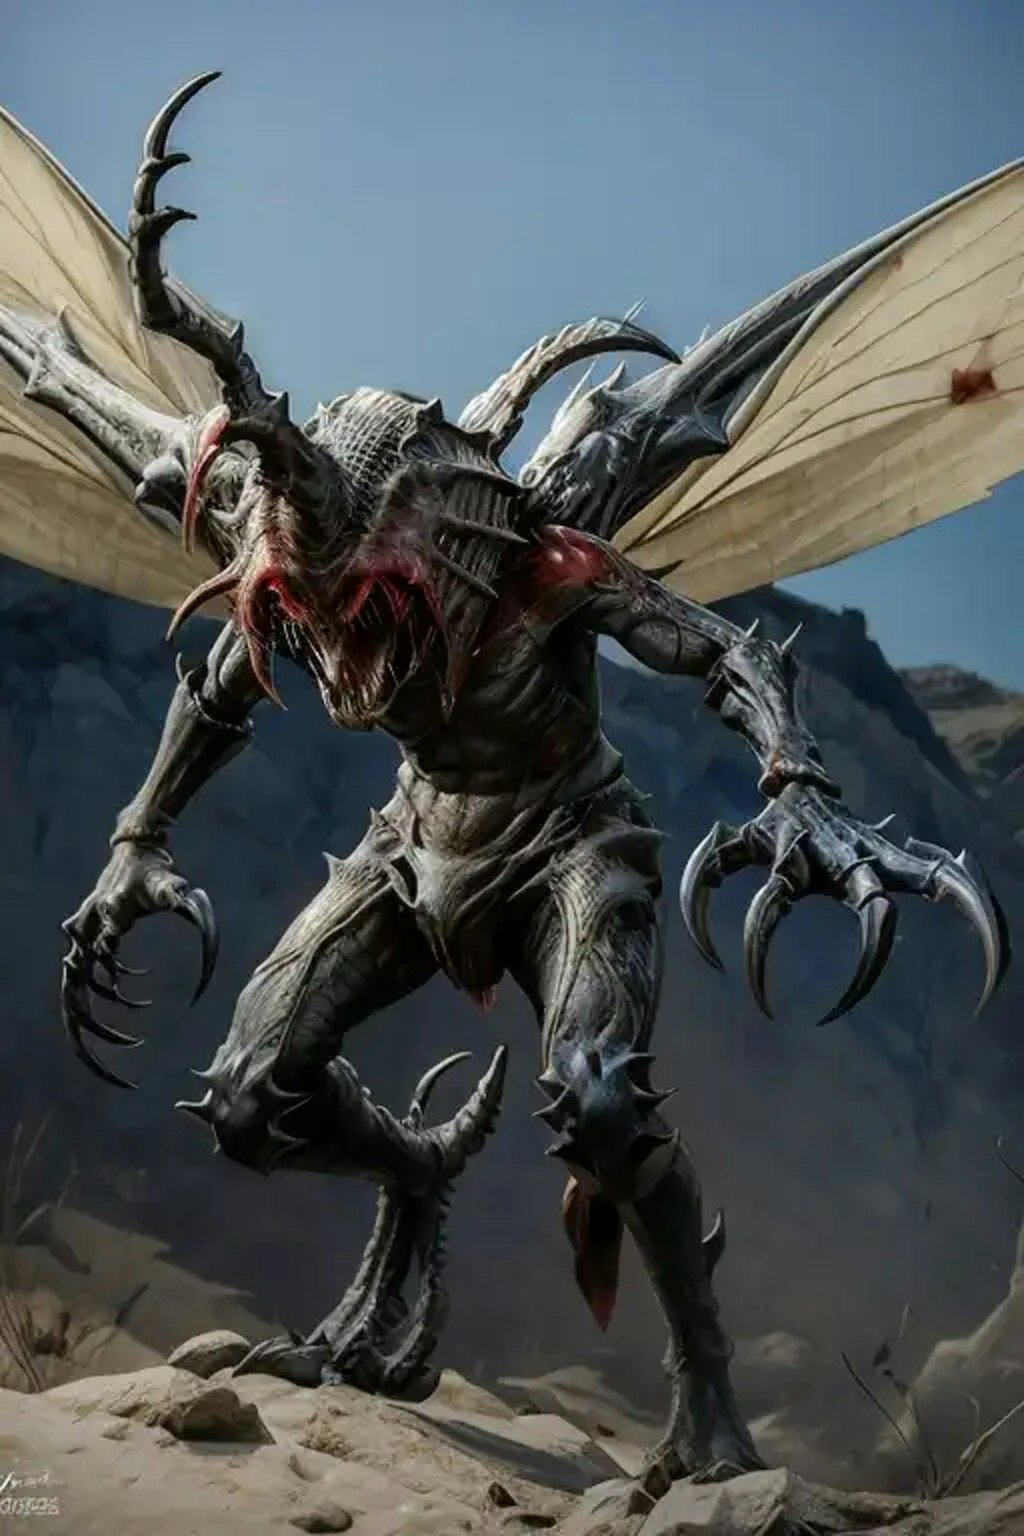 Scary winged creatures appear on top of mountains